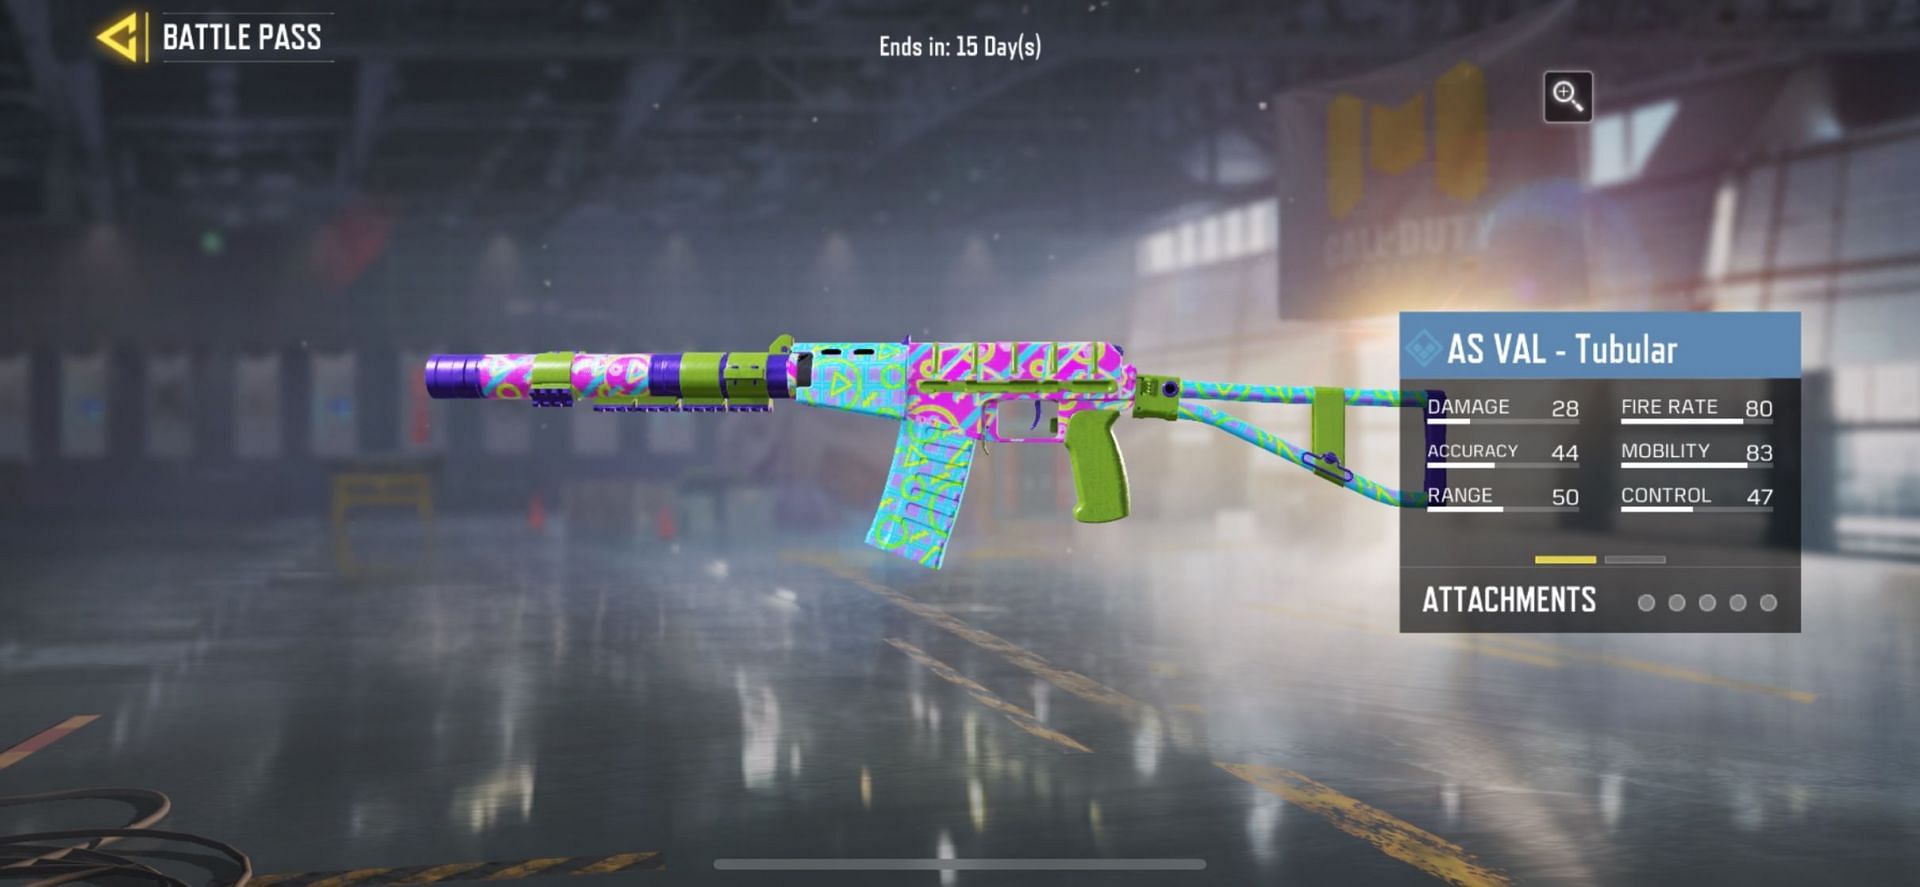 Players can use this colorful rendition of the AS VAL - Tubular in order to add some color to the 80s themed Season 3 (Image via Activision)